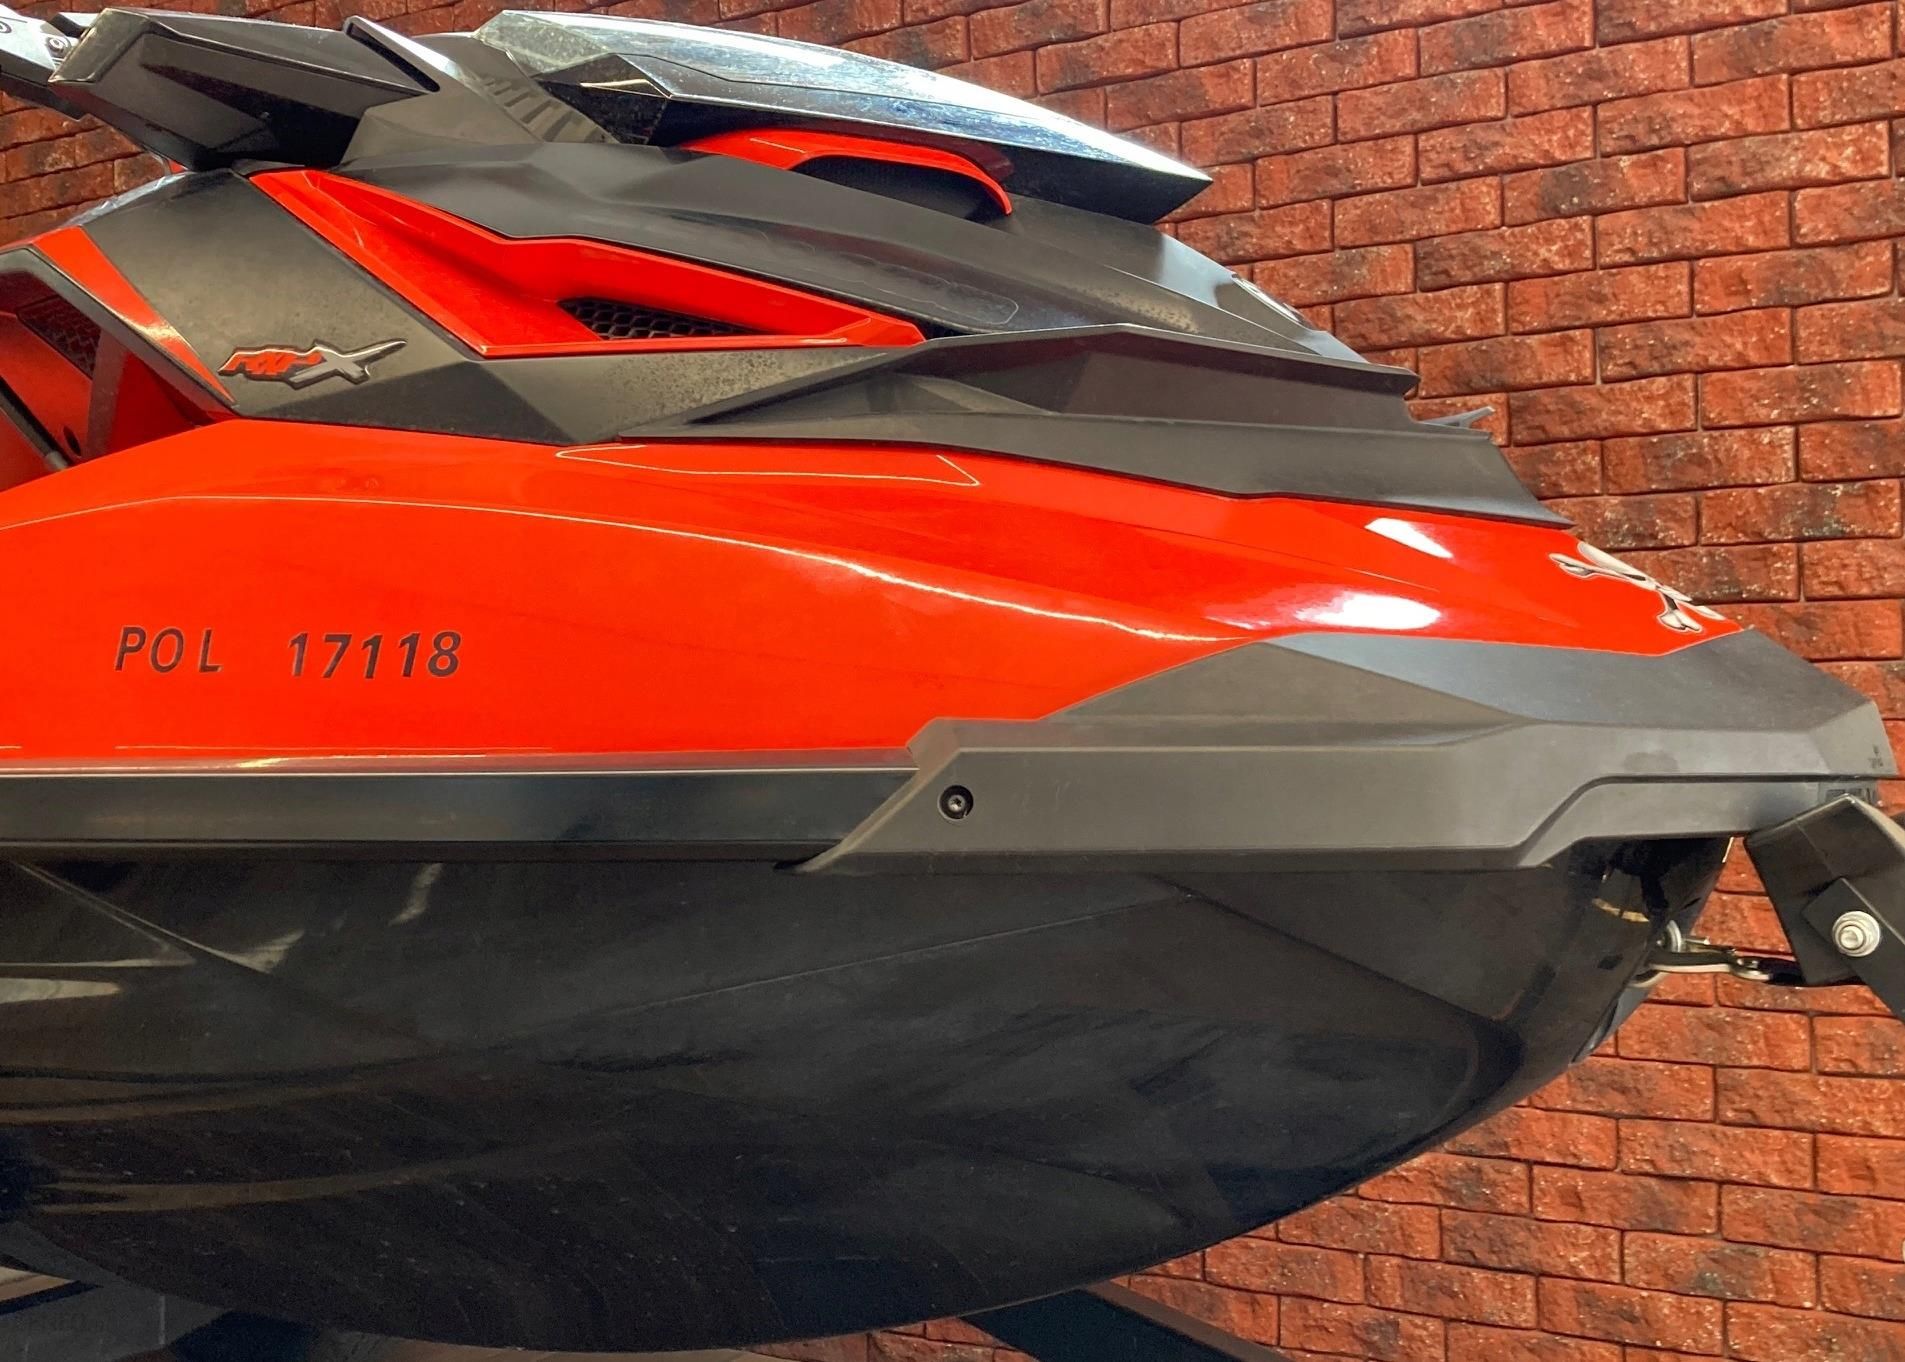 Skuter Wodny Sea-Doo RXP 300 RS 2016r 23 mth